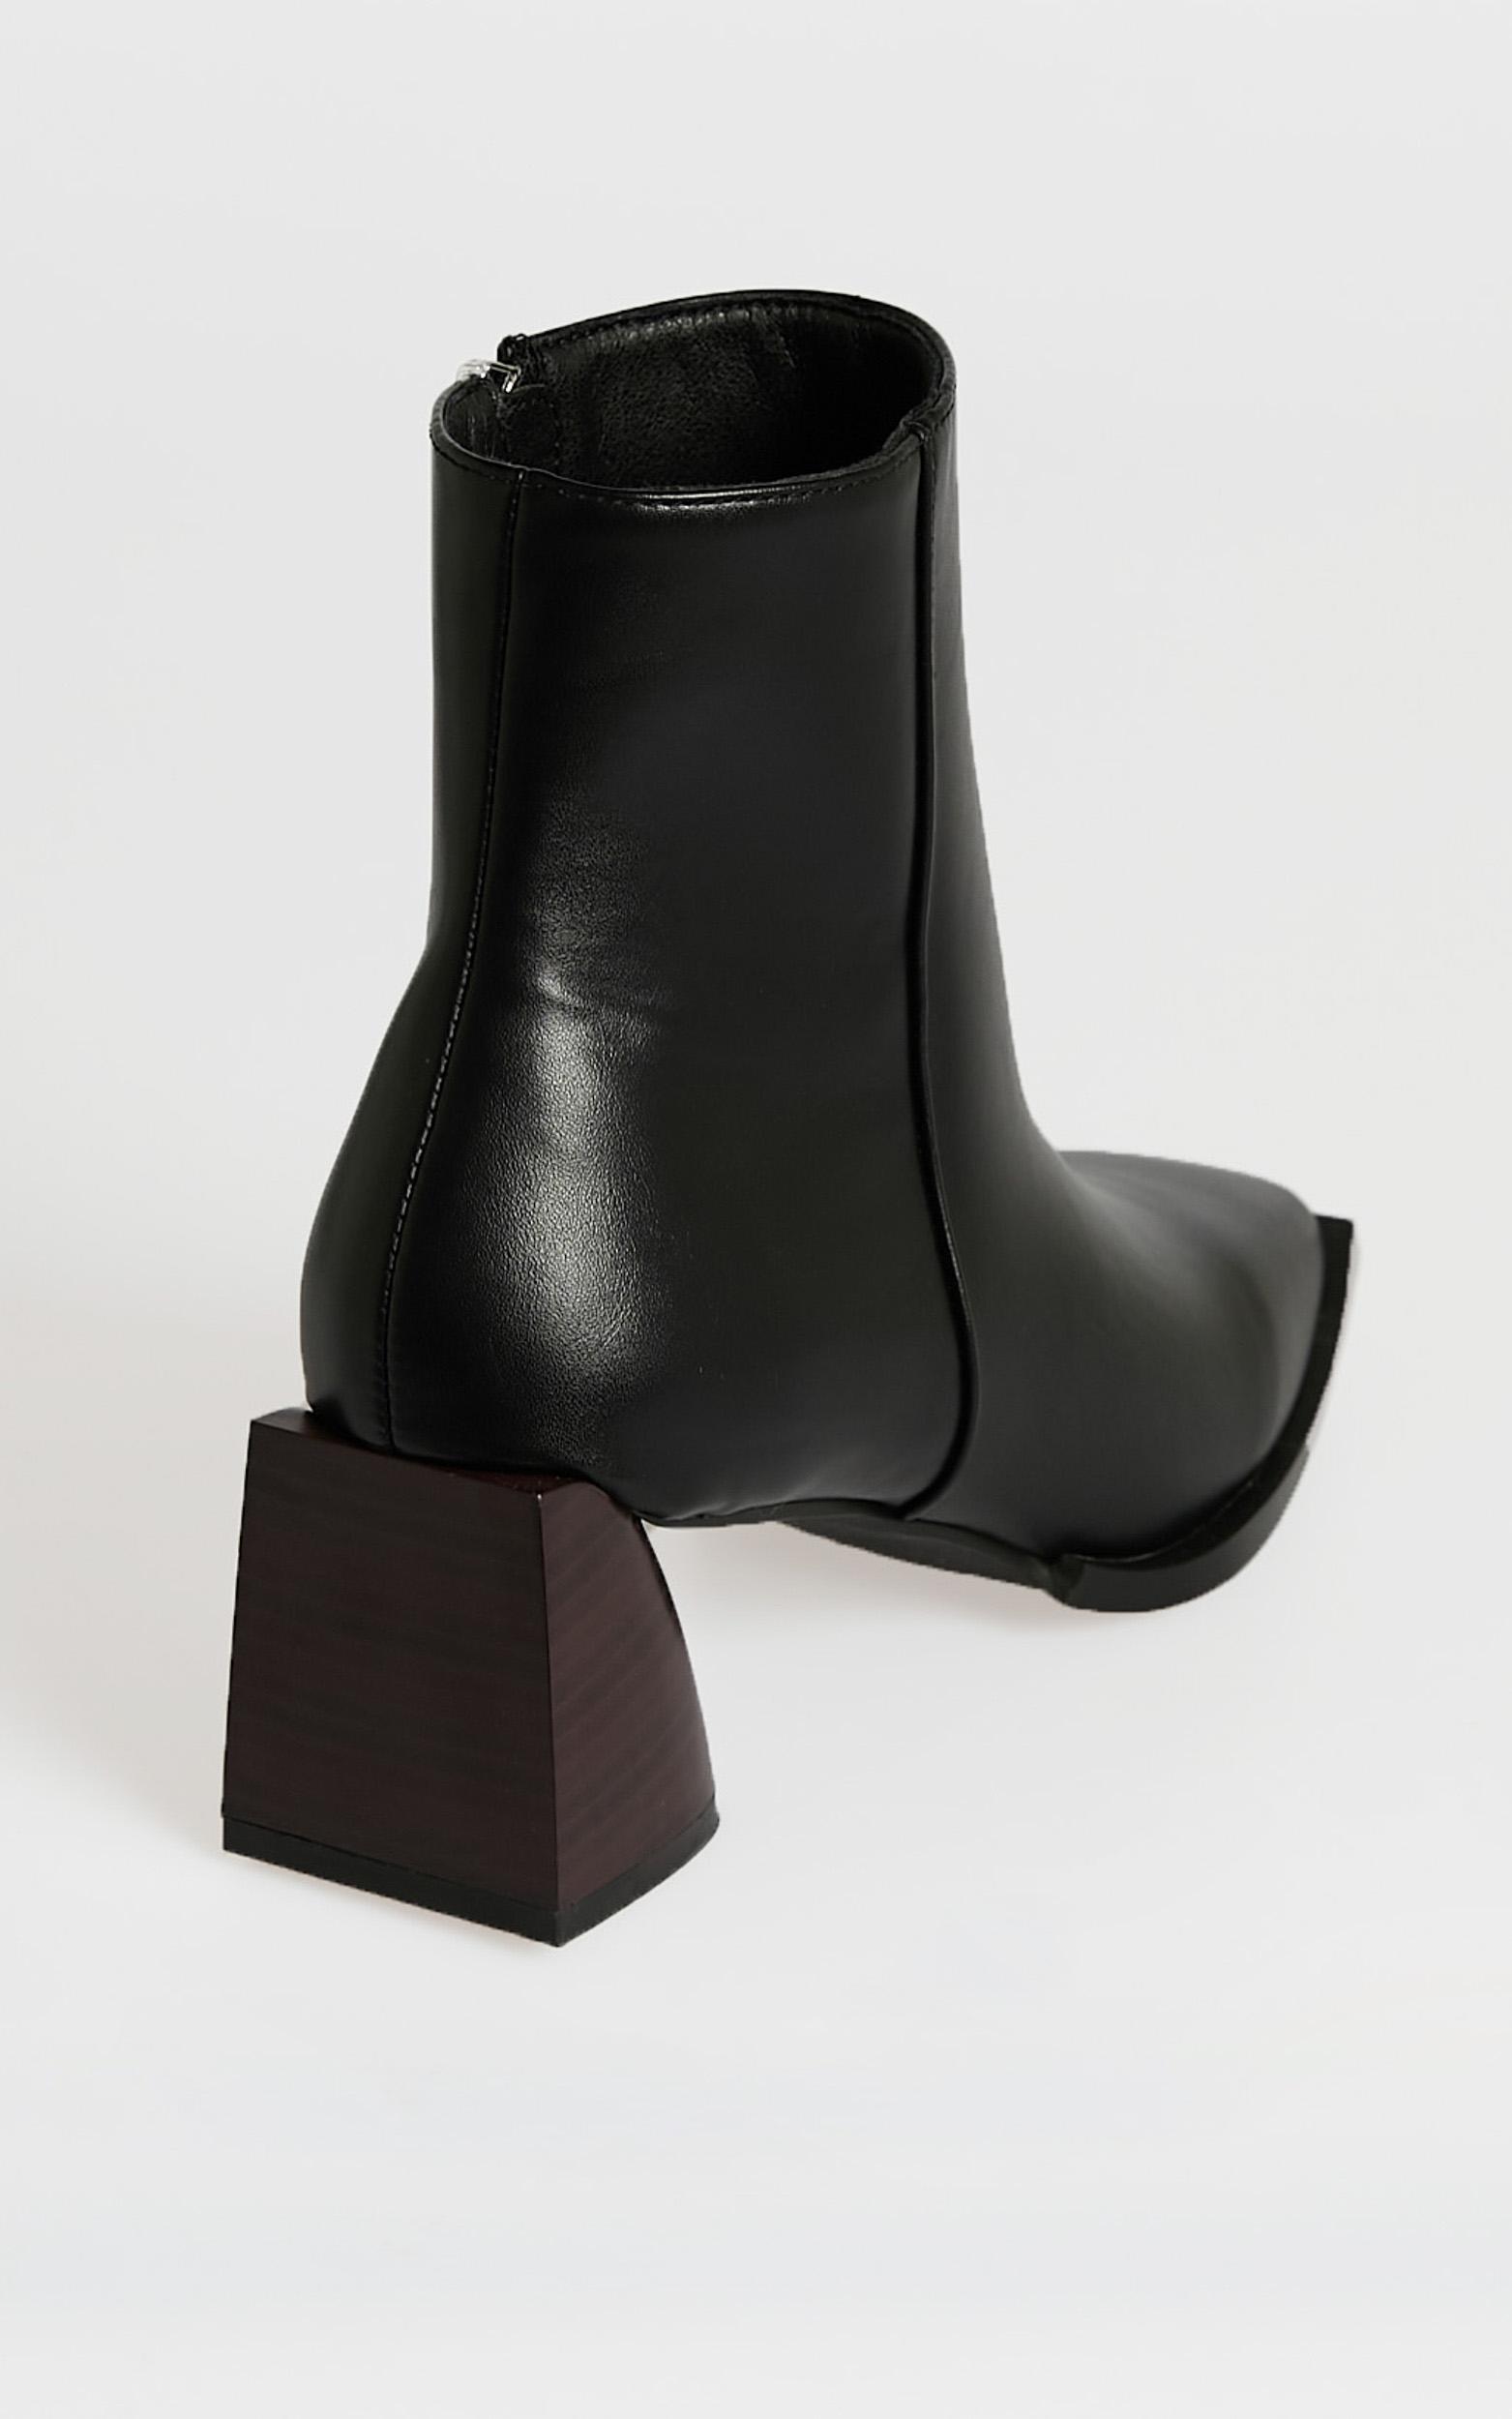 Therapy - Giri Boots in Black - 05, BLK1, hi-res image number null